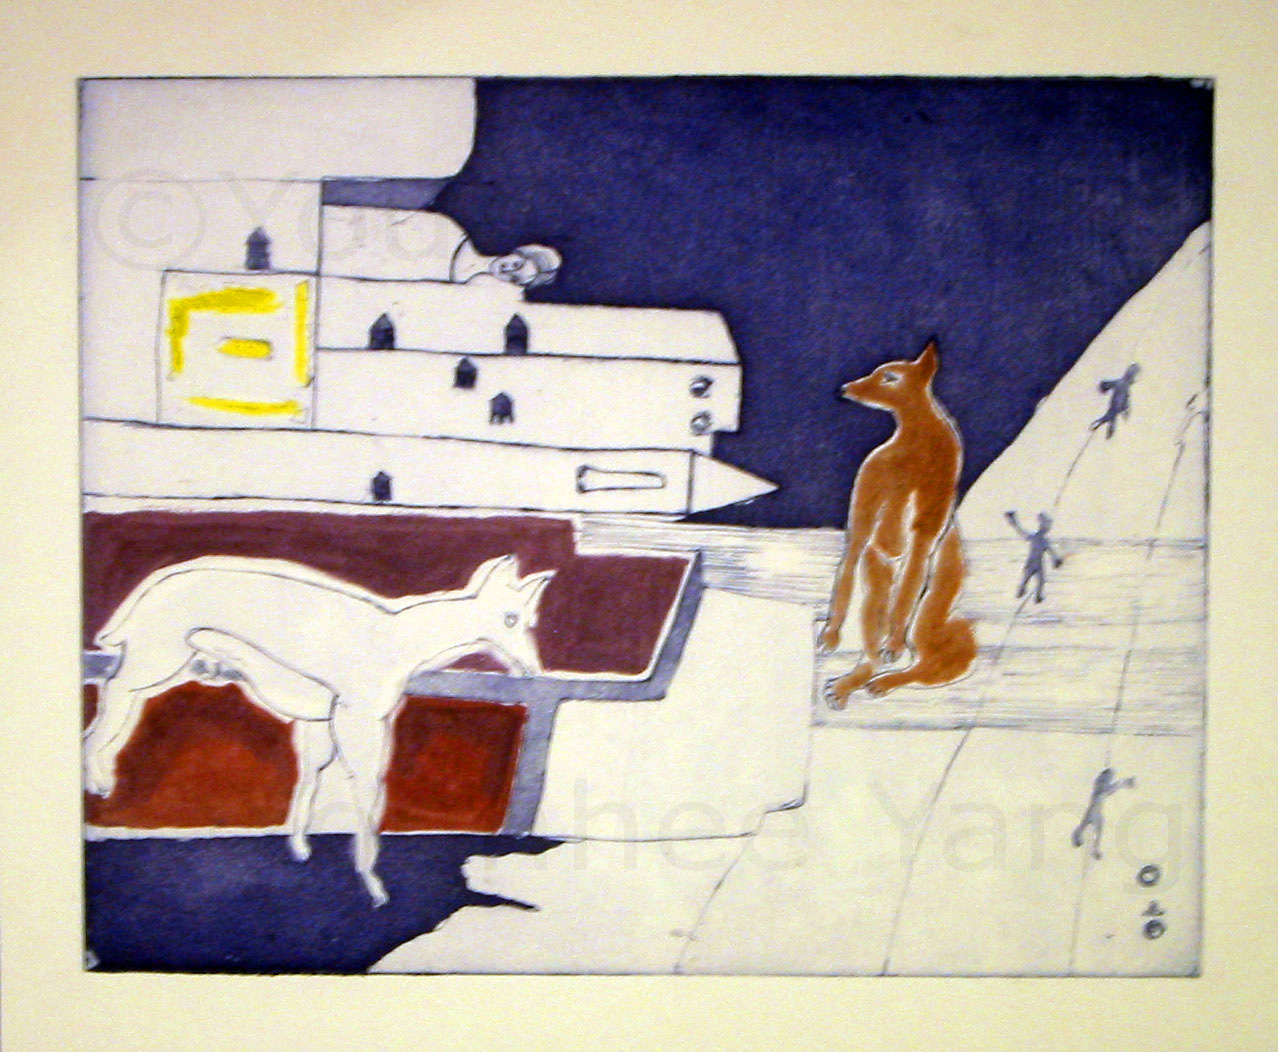 Jury and the City Colorprint on Paper 25x15cm